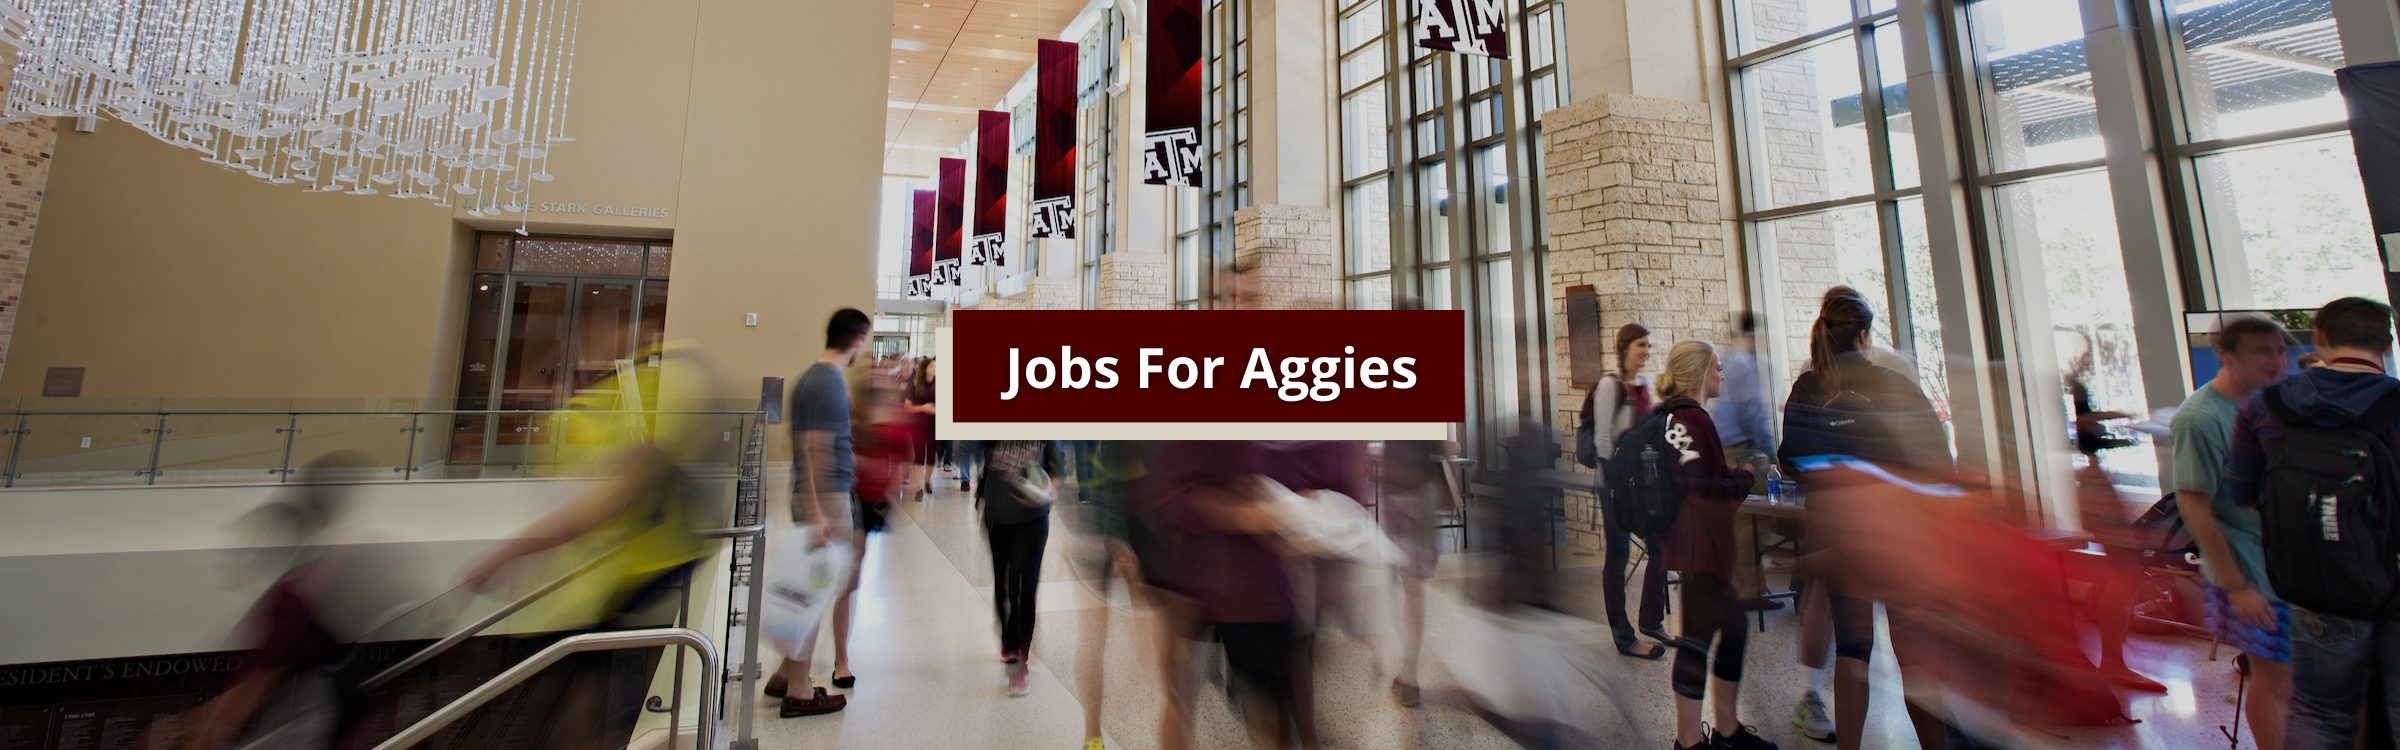 Jobs For Aggies Title